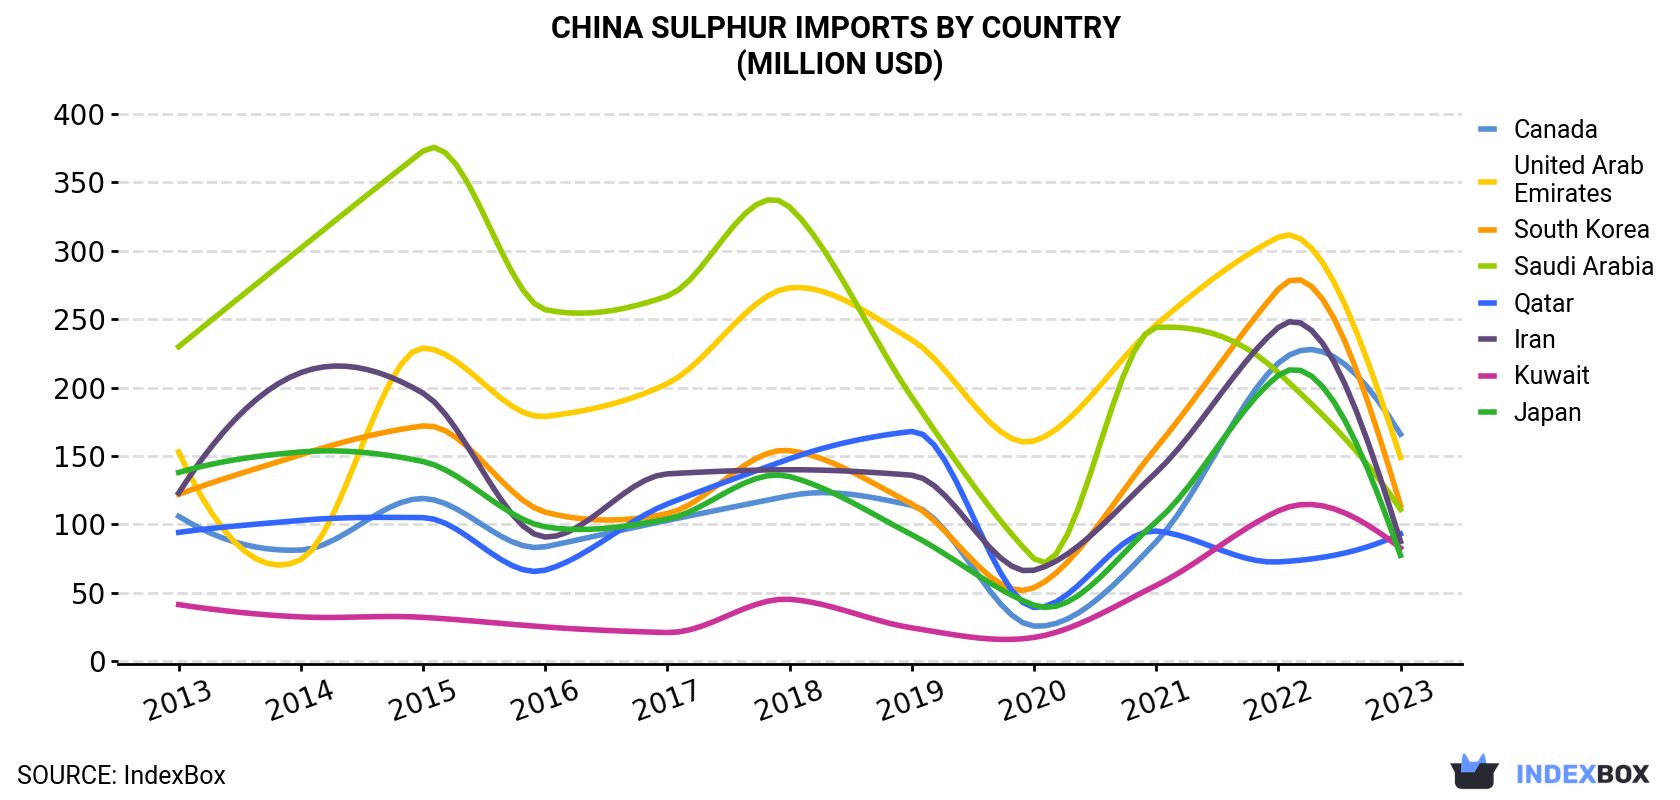 China Sulphur Imports By Country (Million USD)